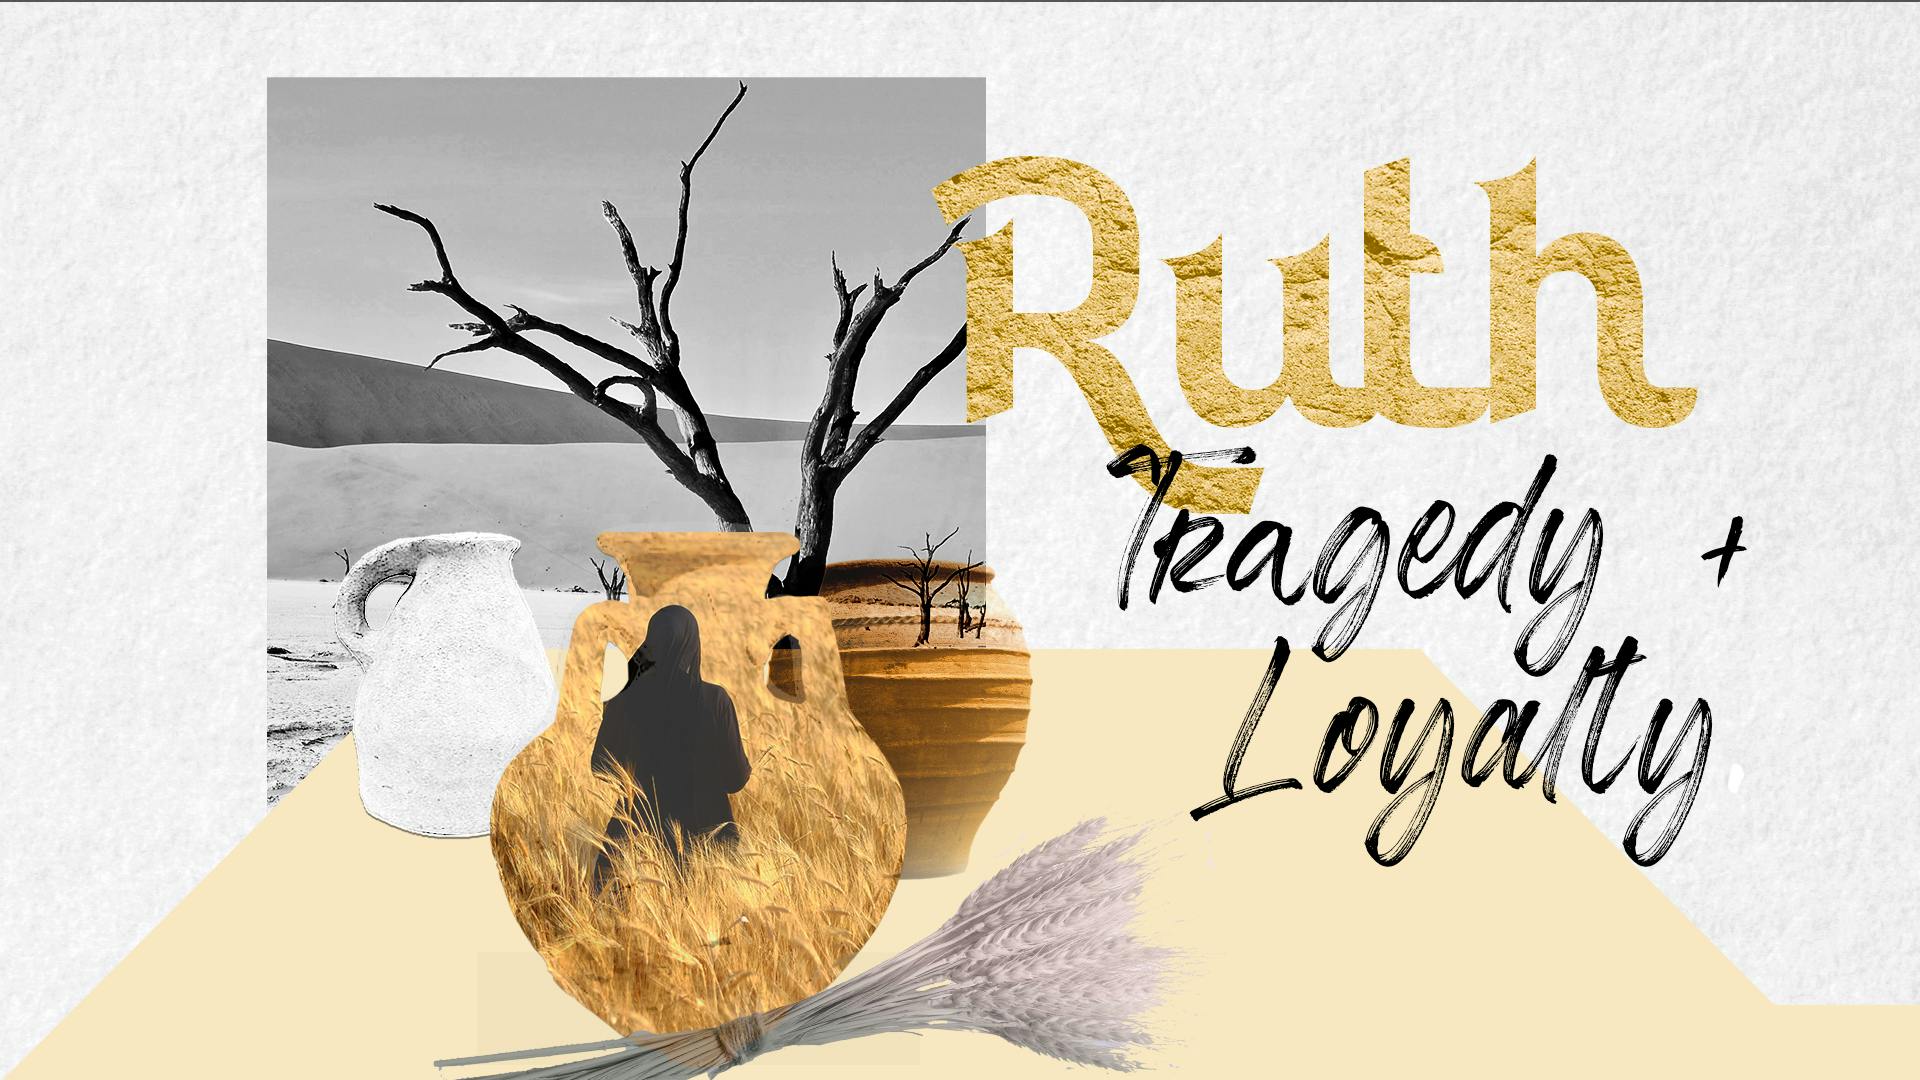 Ruth 1 - Tragedy and Loyalty cover for post